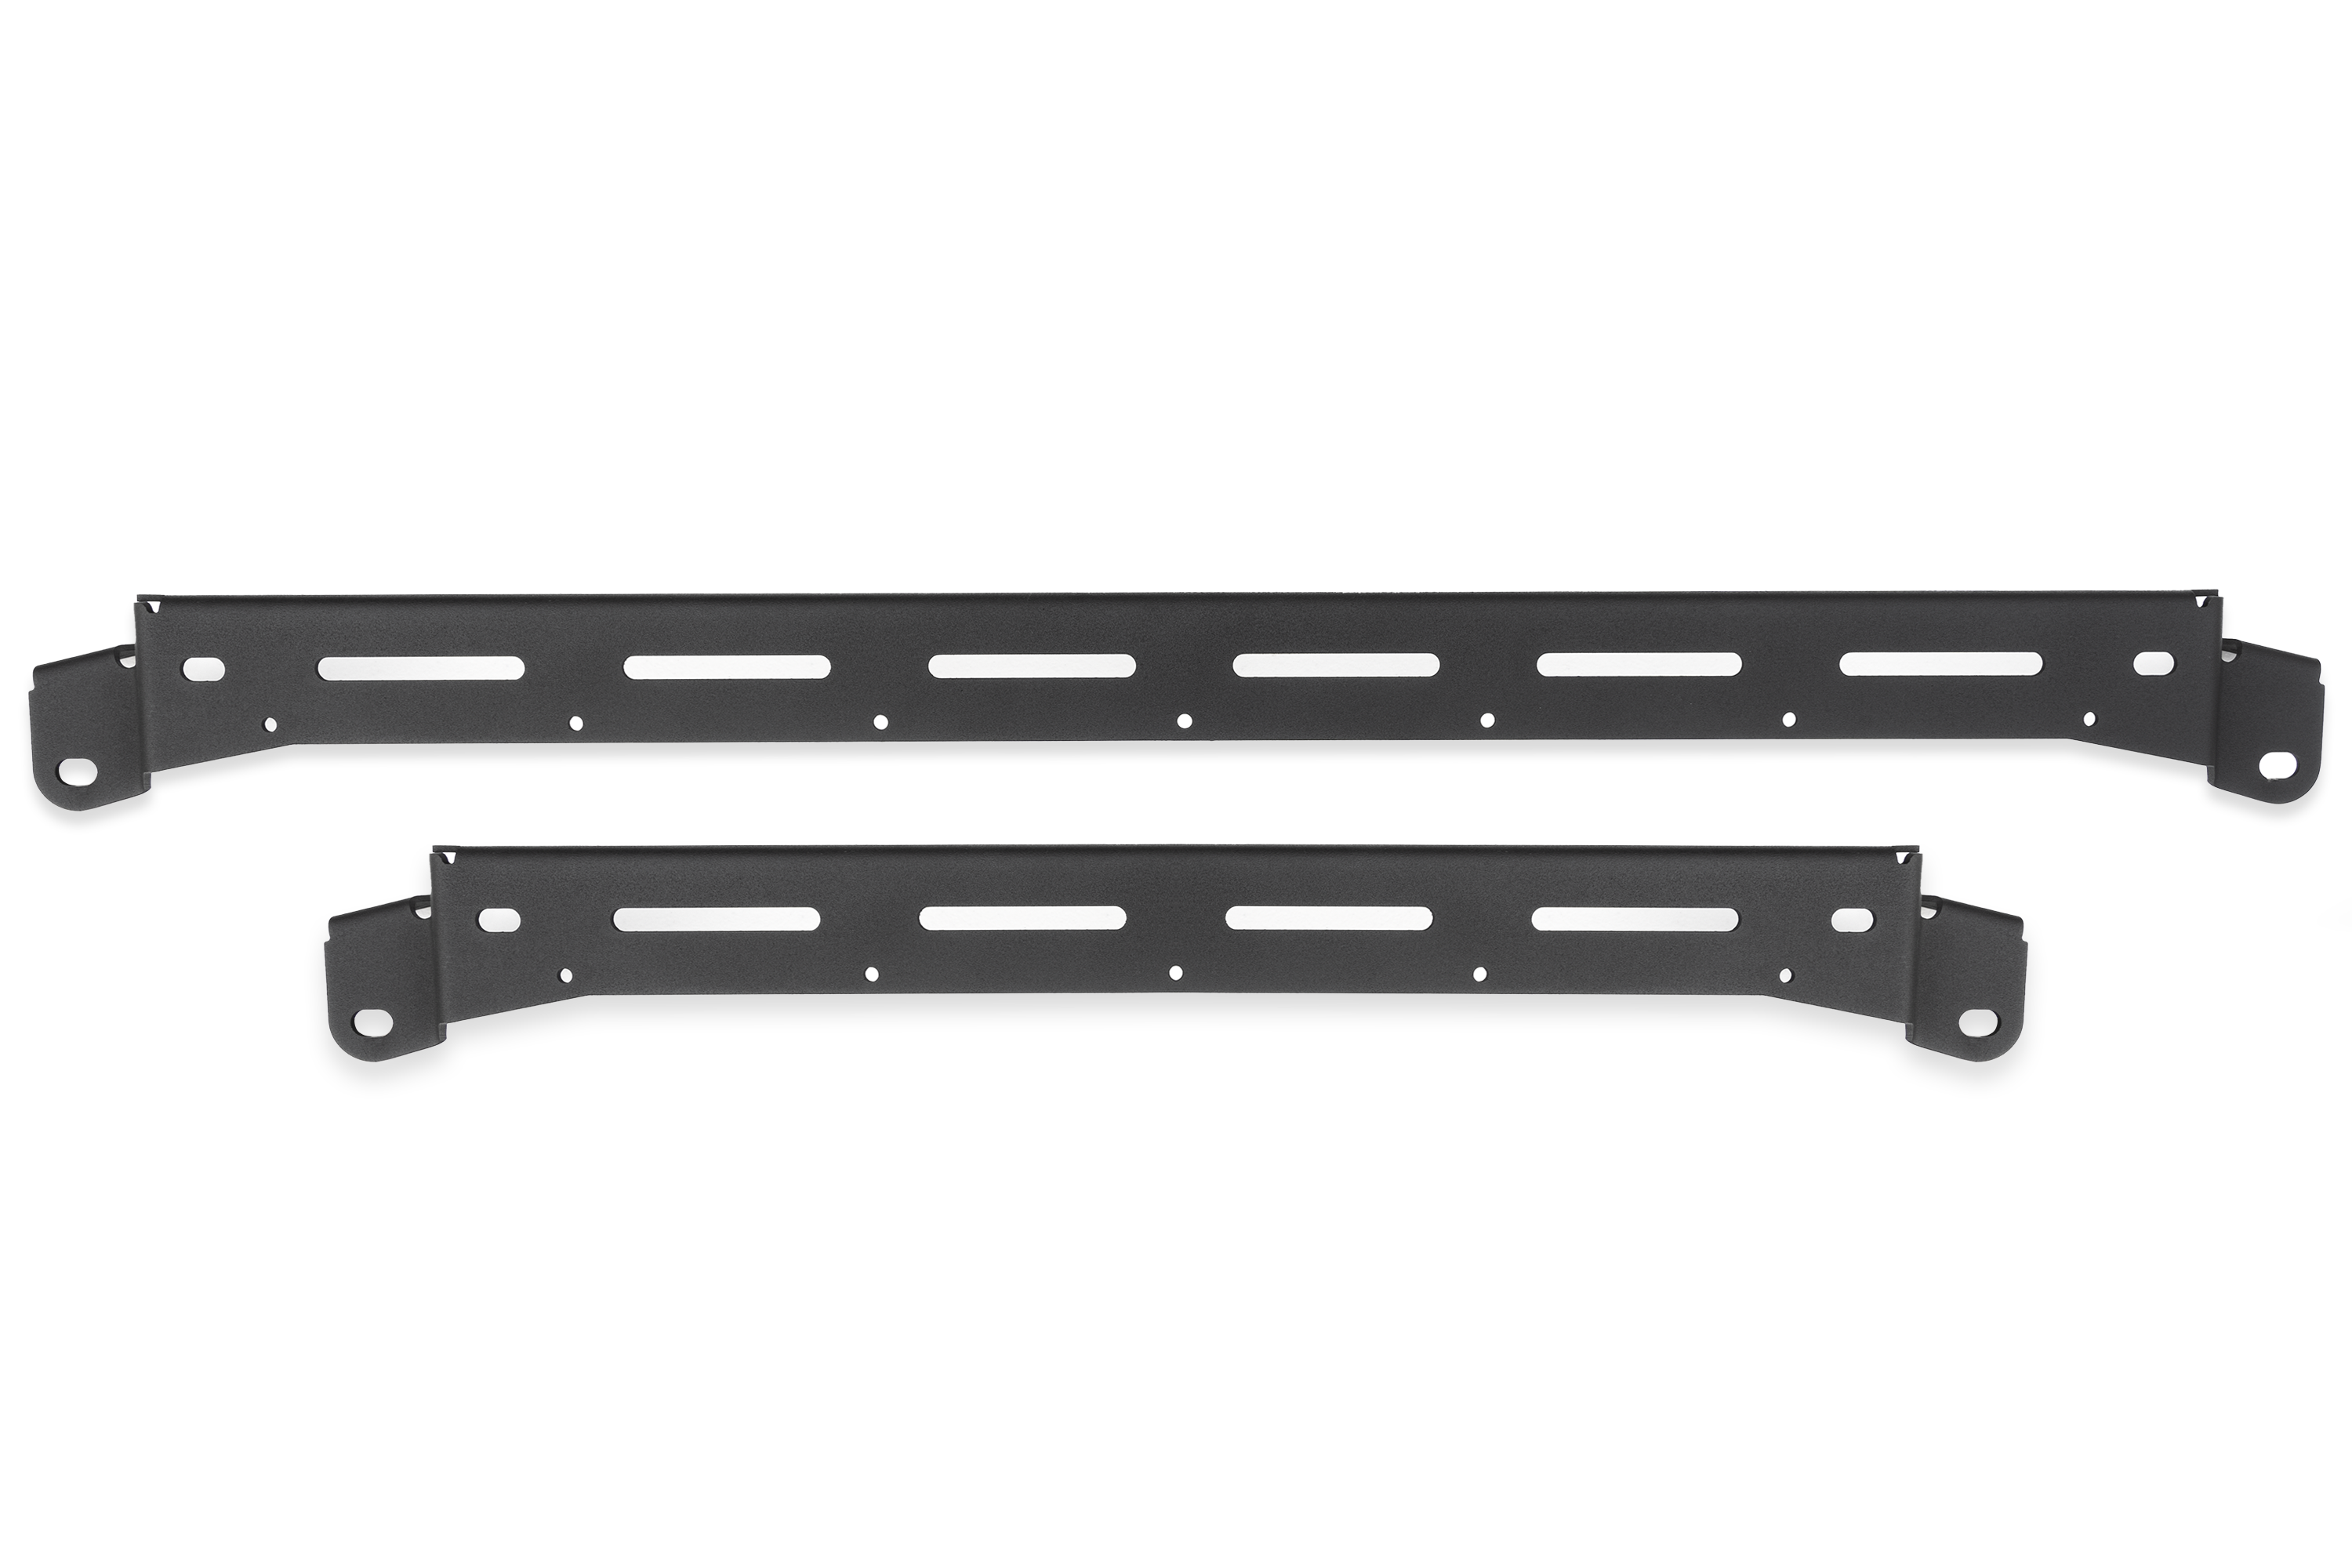 Door Buster - SPV Parts 2021+ Ford Bronco Modular Bumper Universal Slotted Cross Mount (Fits MANY lights)